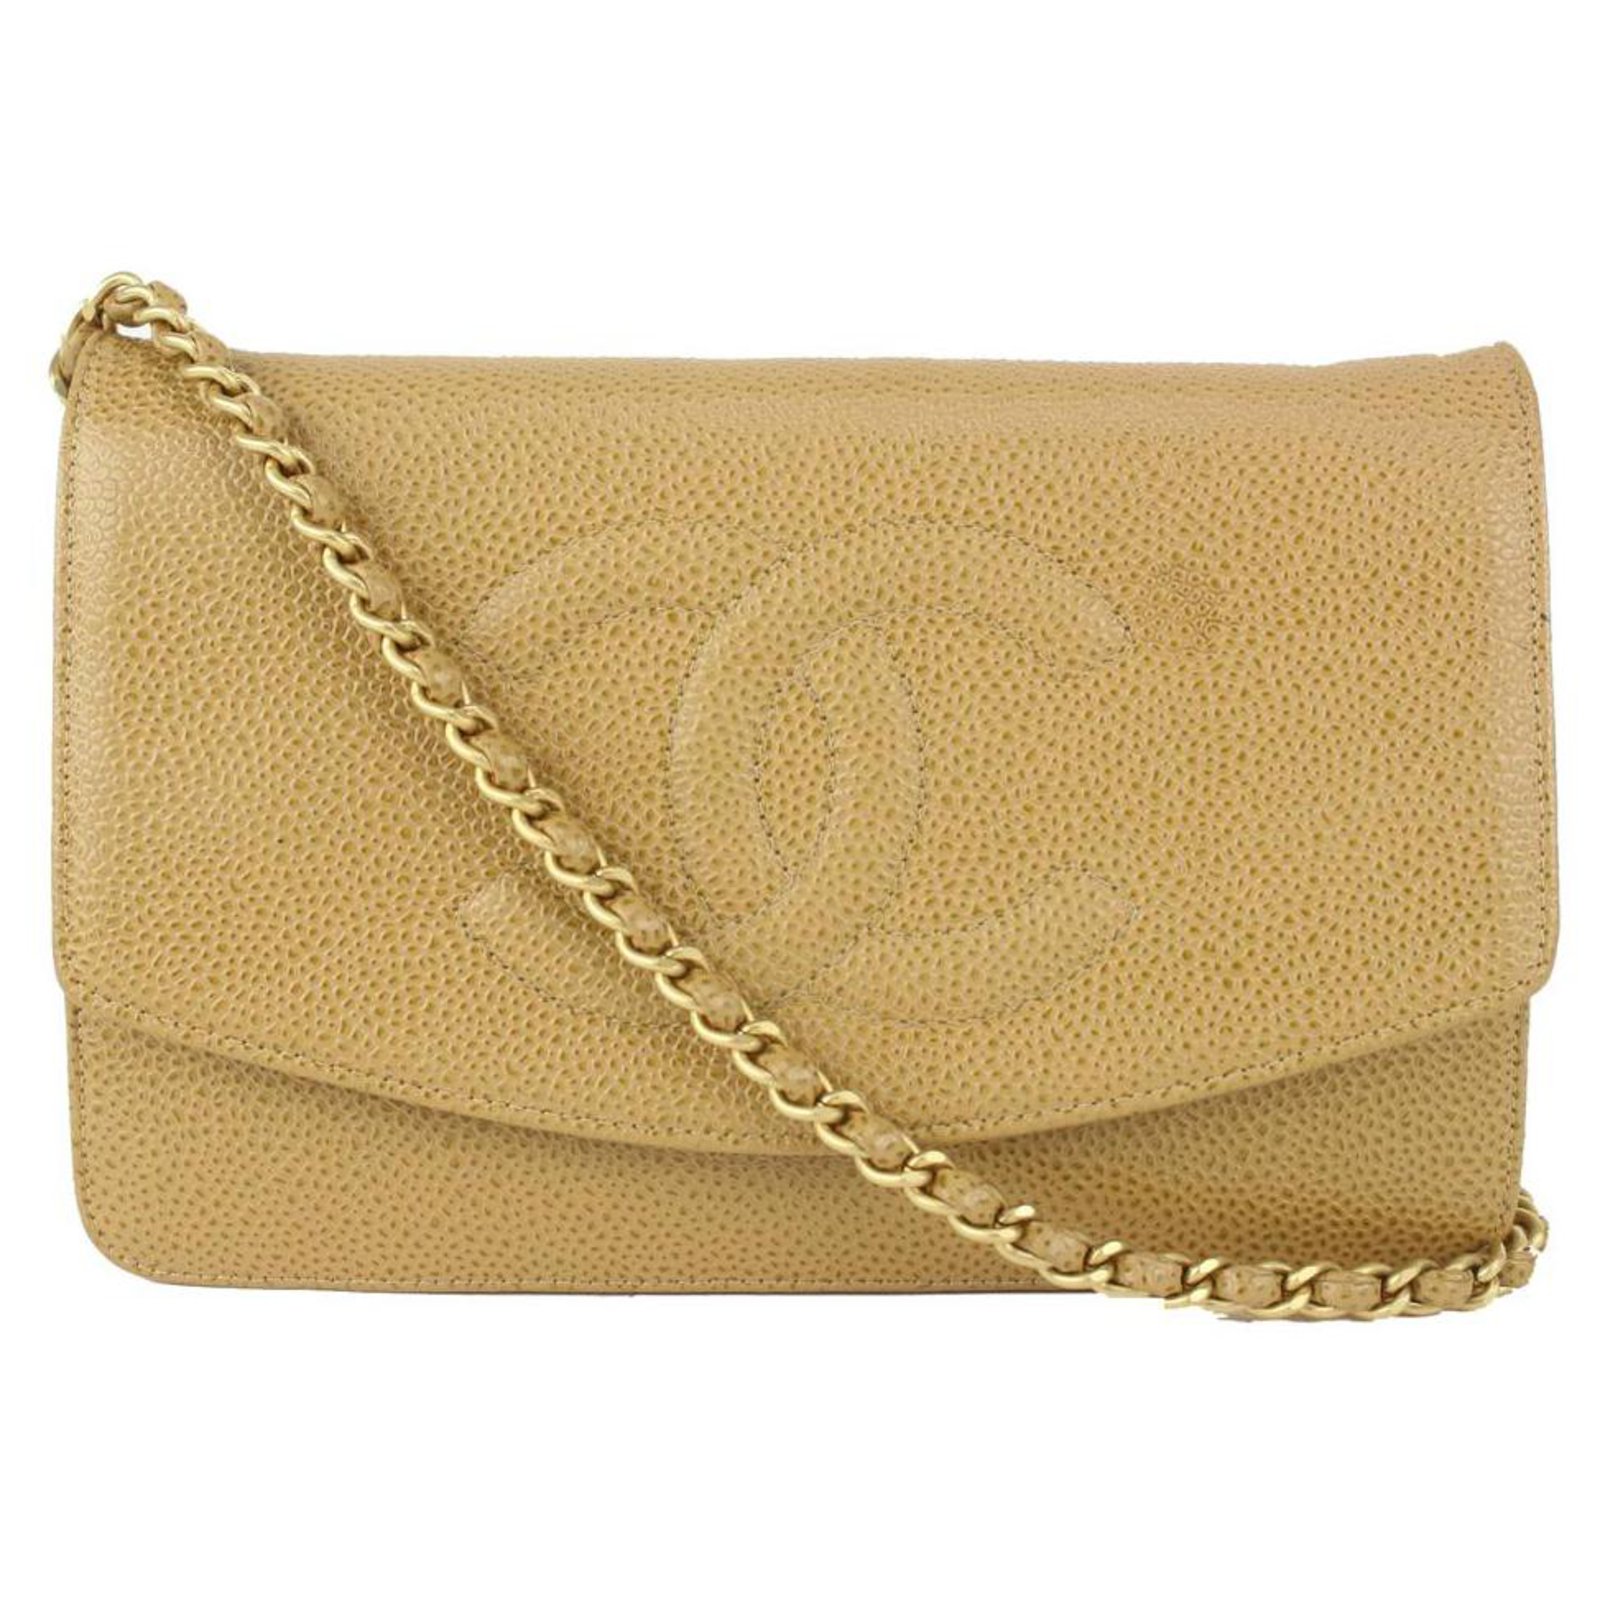 chanel black and gold purse chain